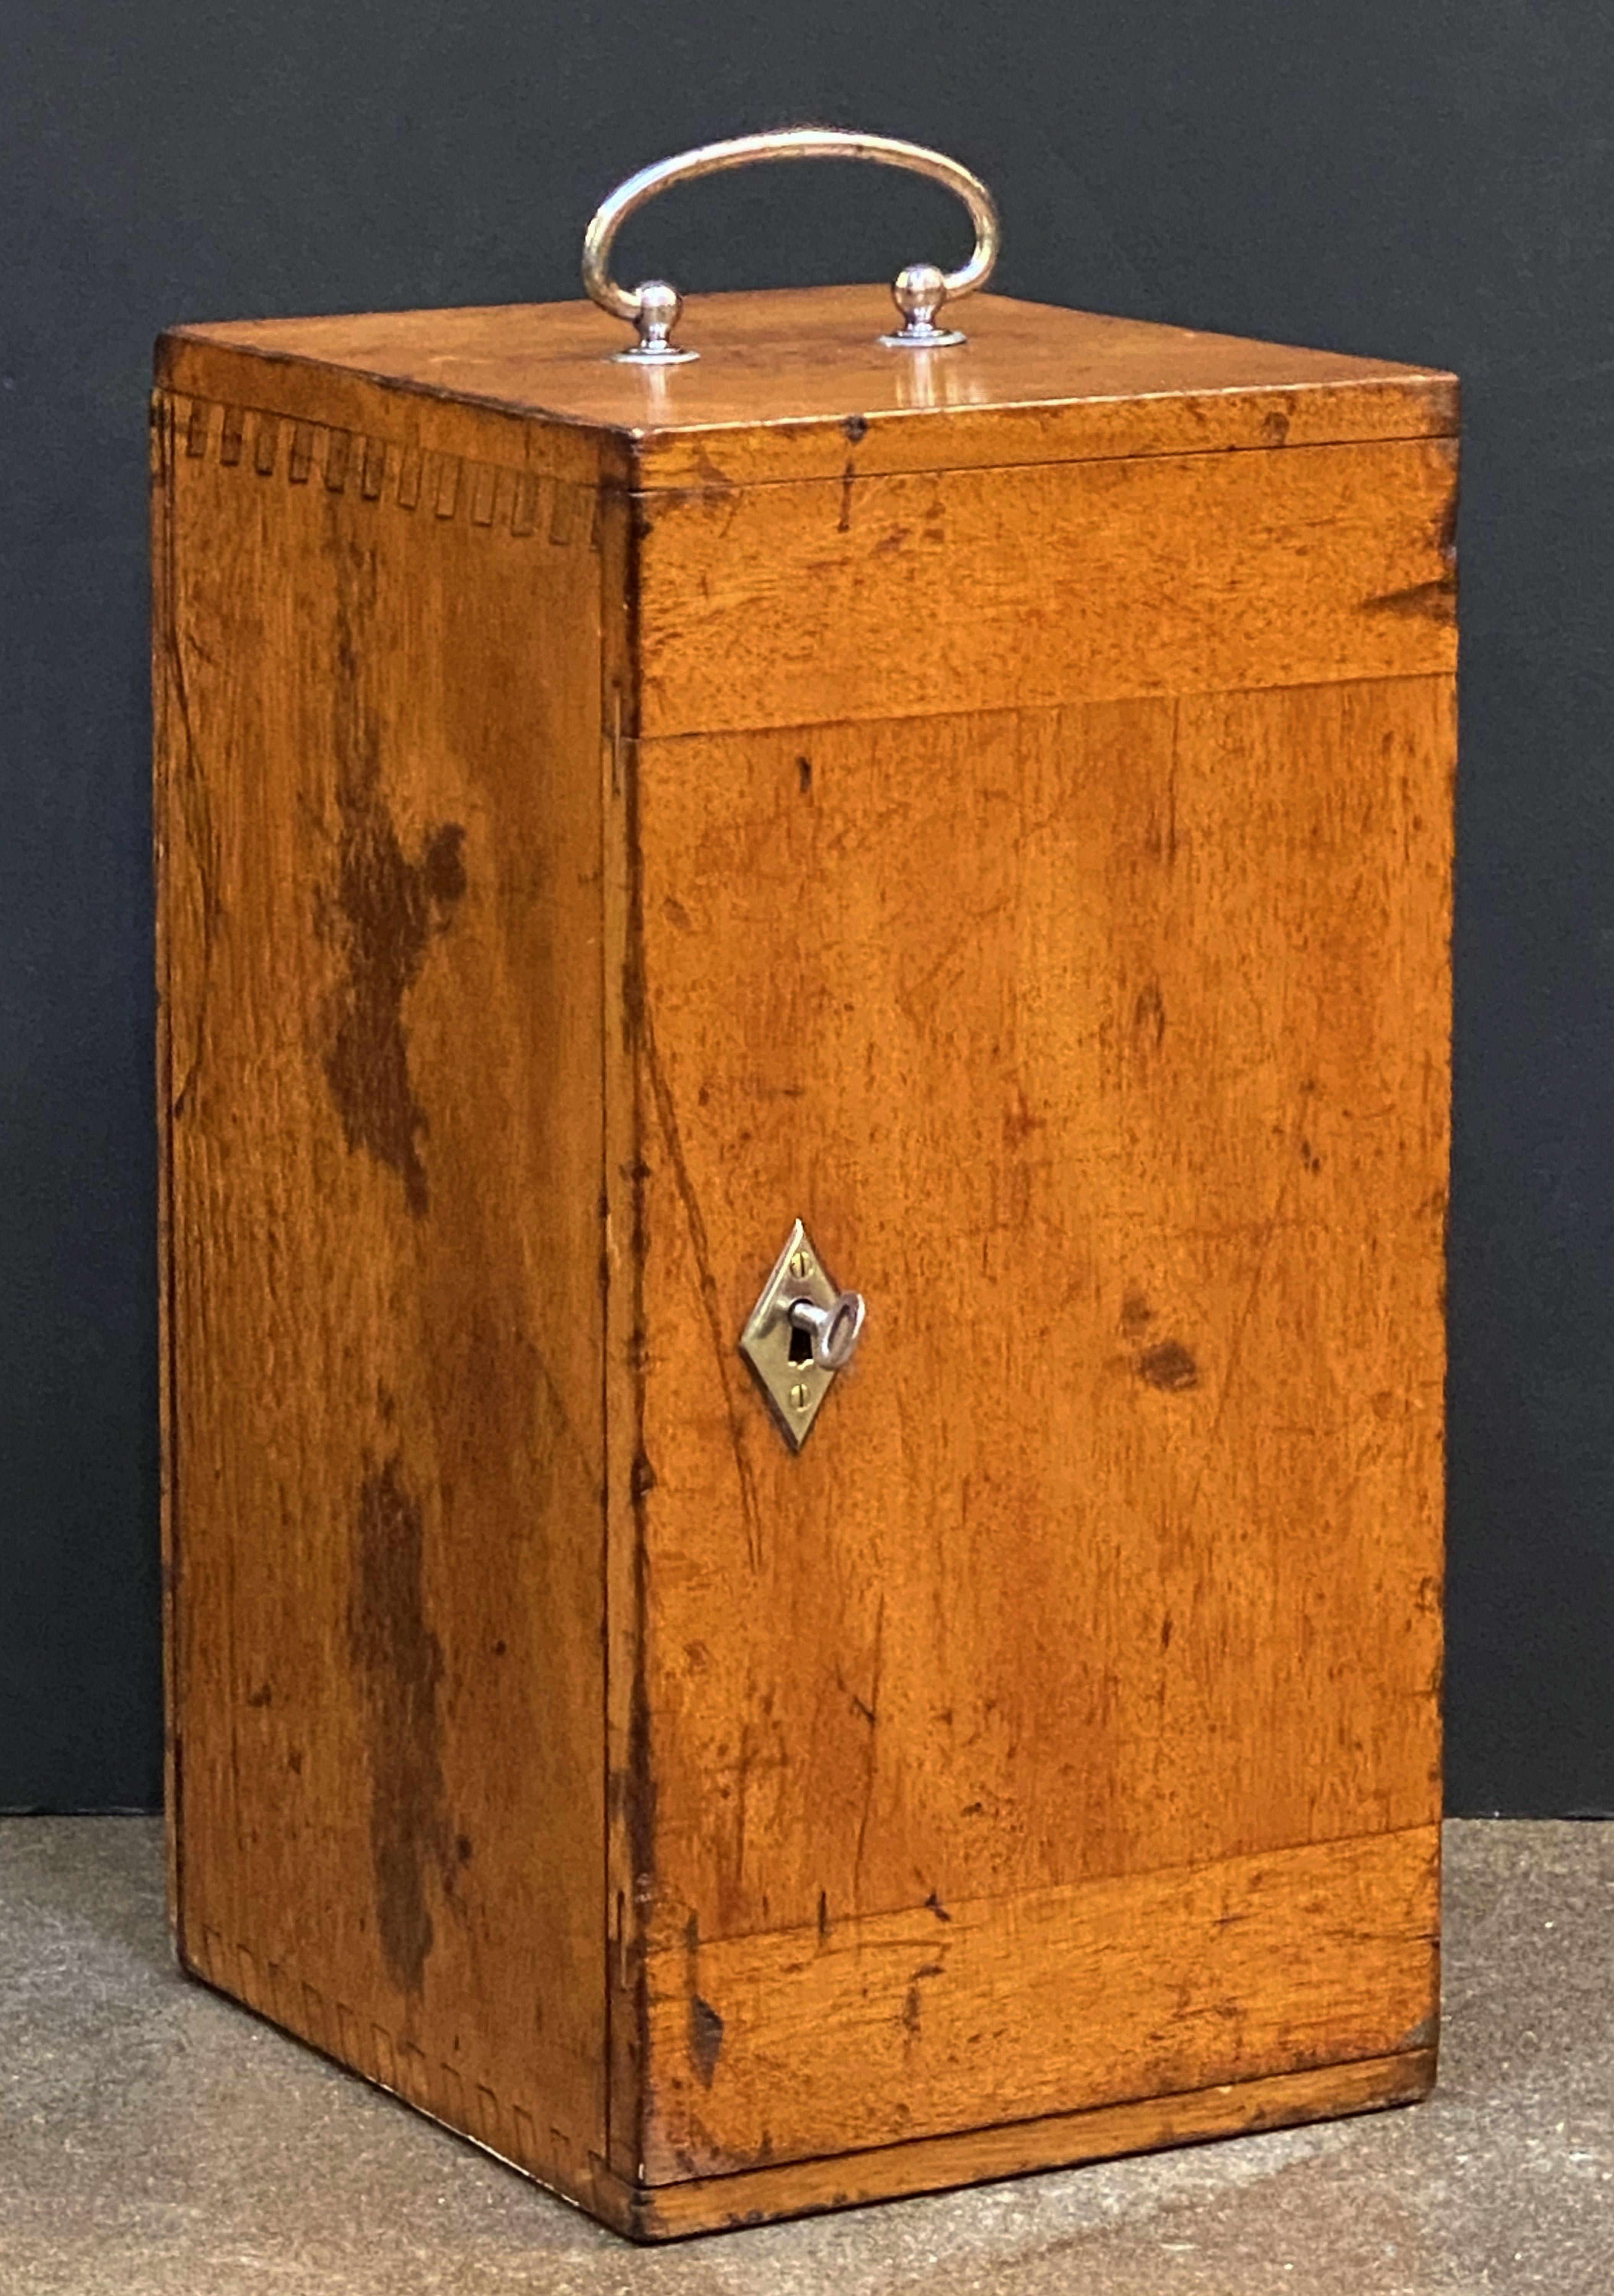 A fine working German compound microscope, circa 1910, by R. Winkel, Gottingen, Germany, in a fitted box of mahogany with nickel hardware and key.

Marked on column front: R. Winkel, Gottingen, Nr. 18507

With removable two fitted wood sliding